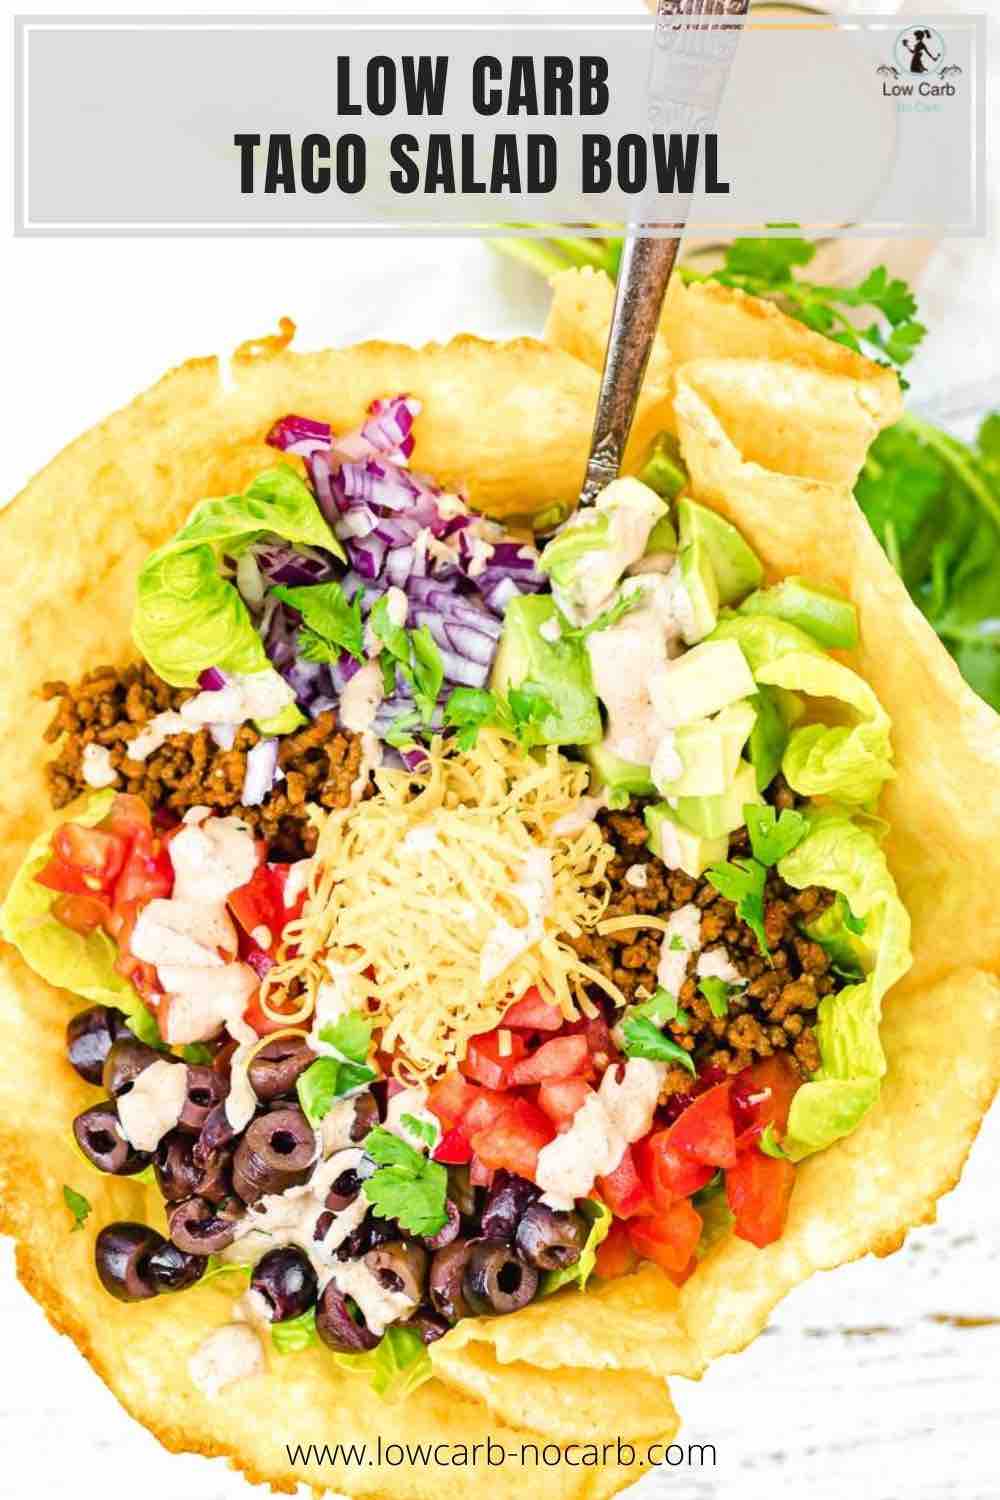 Taco Salad Bowl with cheese.